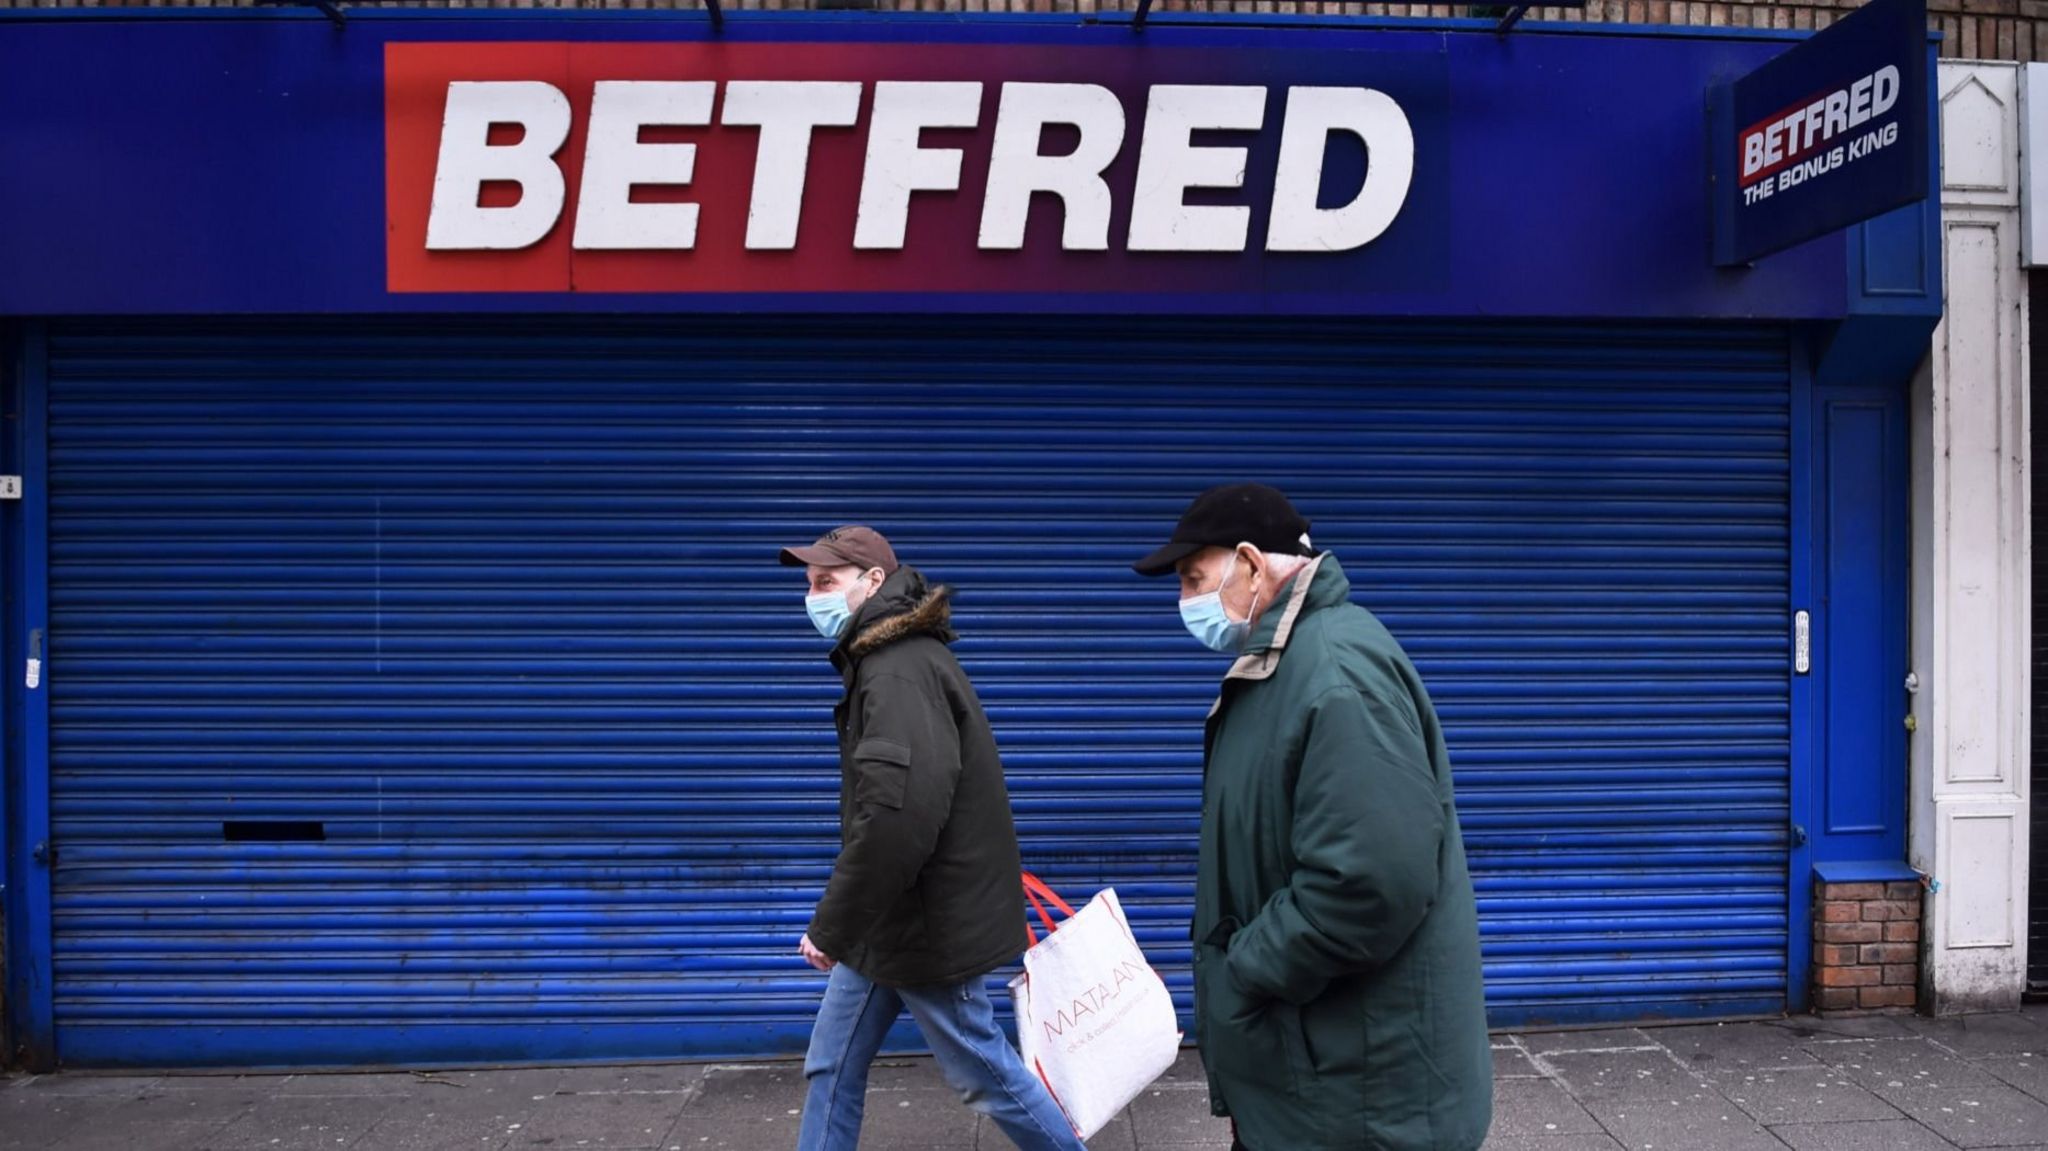 Betfred shop in Stockport, closed during the pandemic